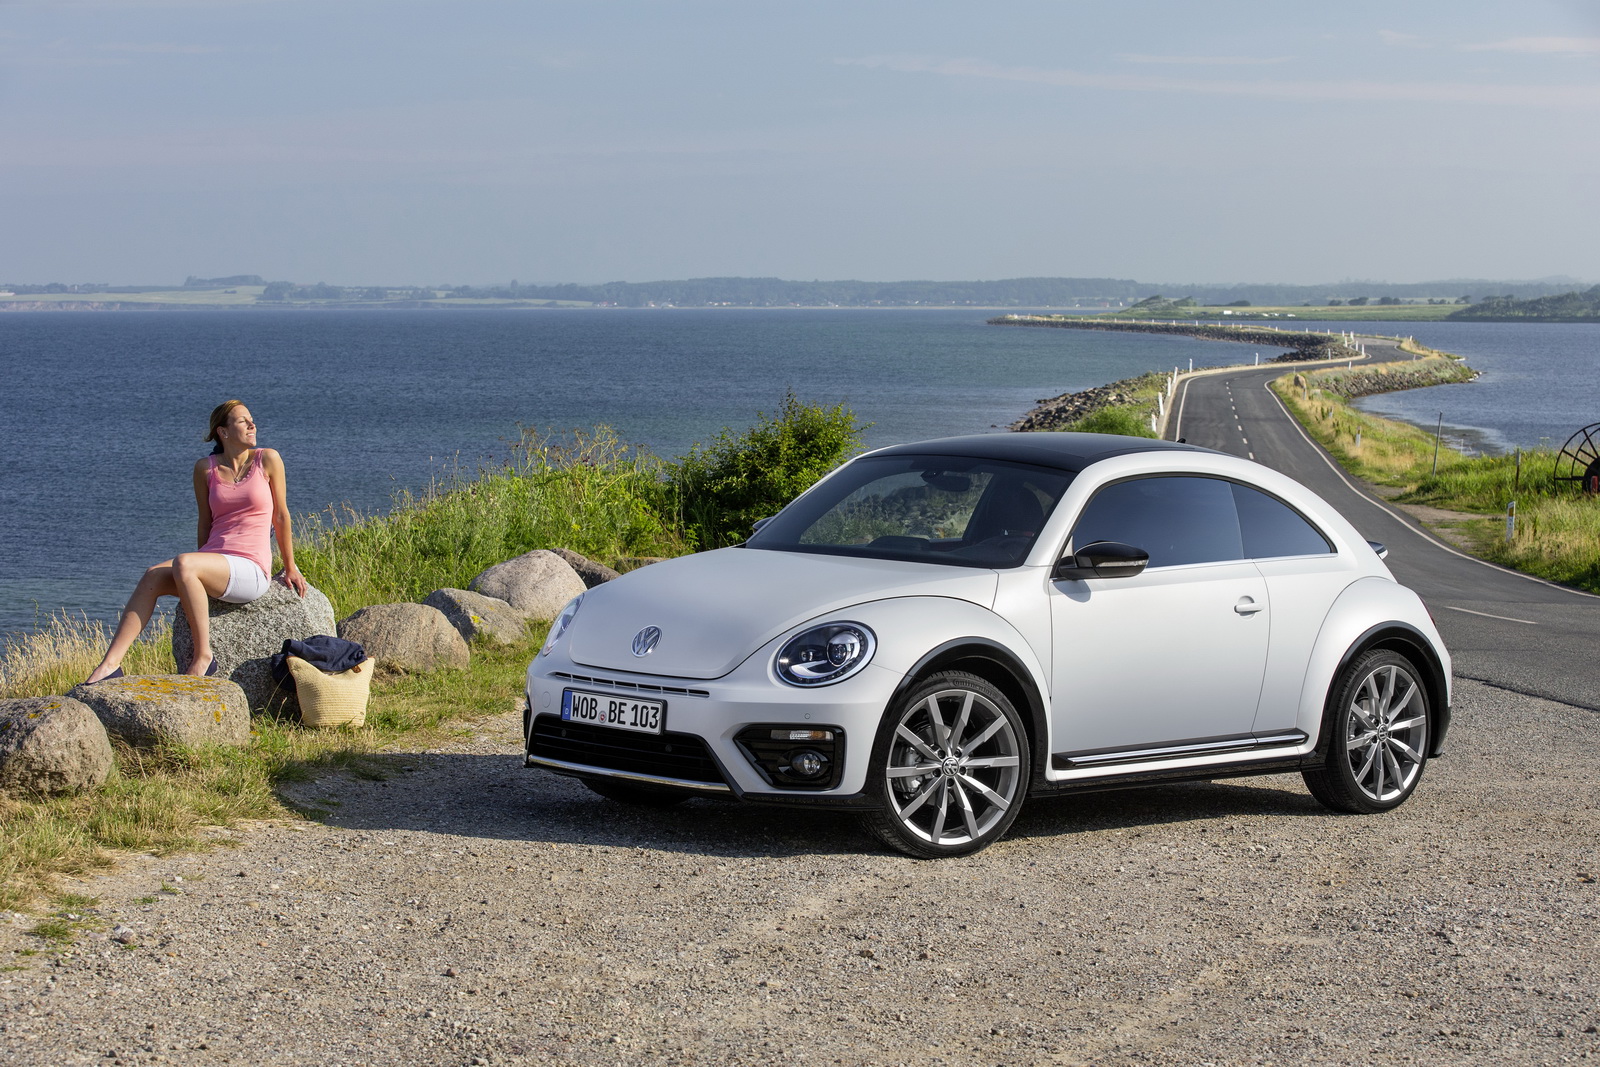 2017 Volkswagen Beetle Detailed in New Photos and Videos - autoevolution